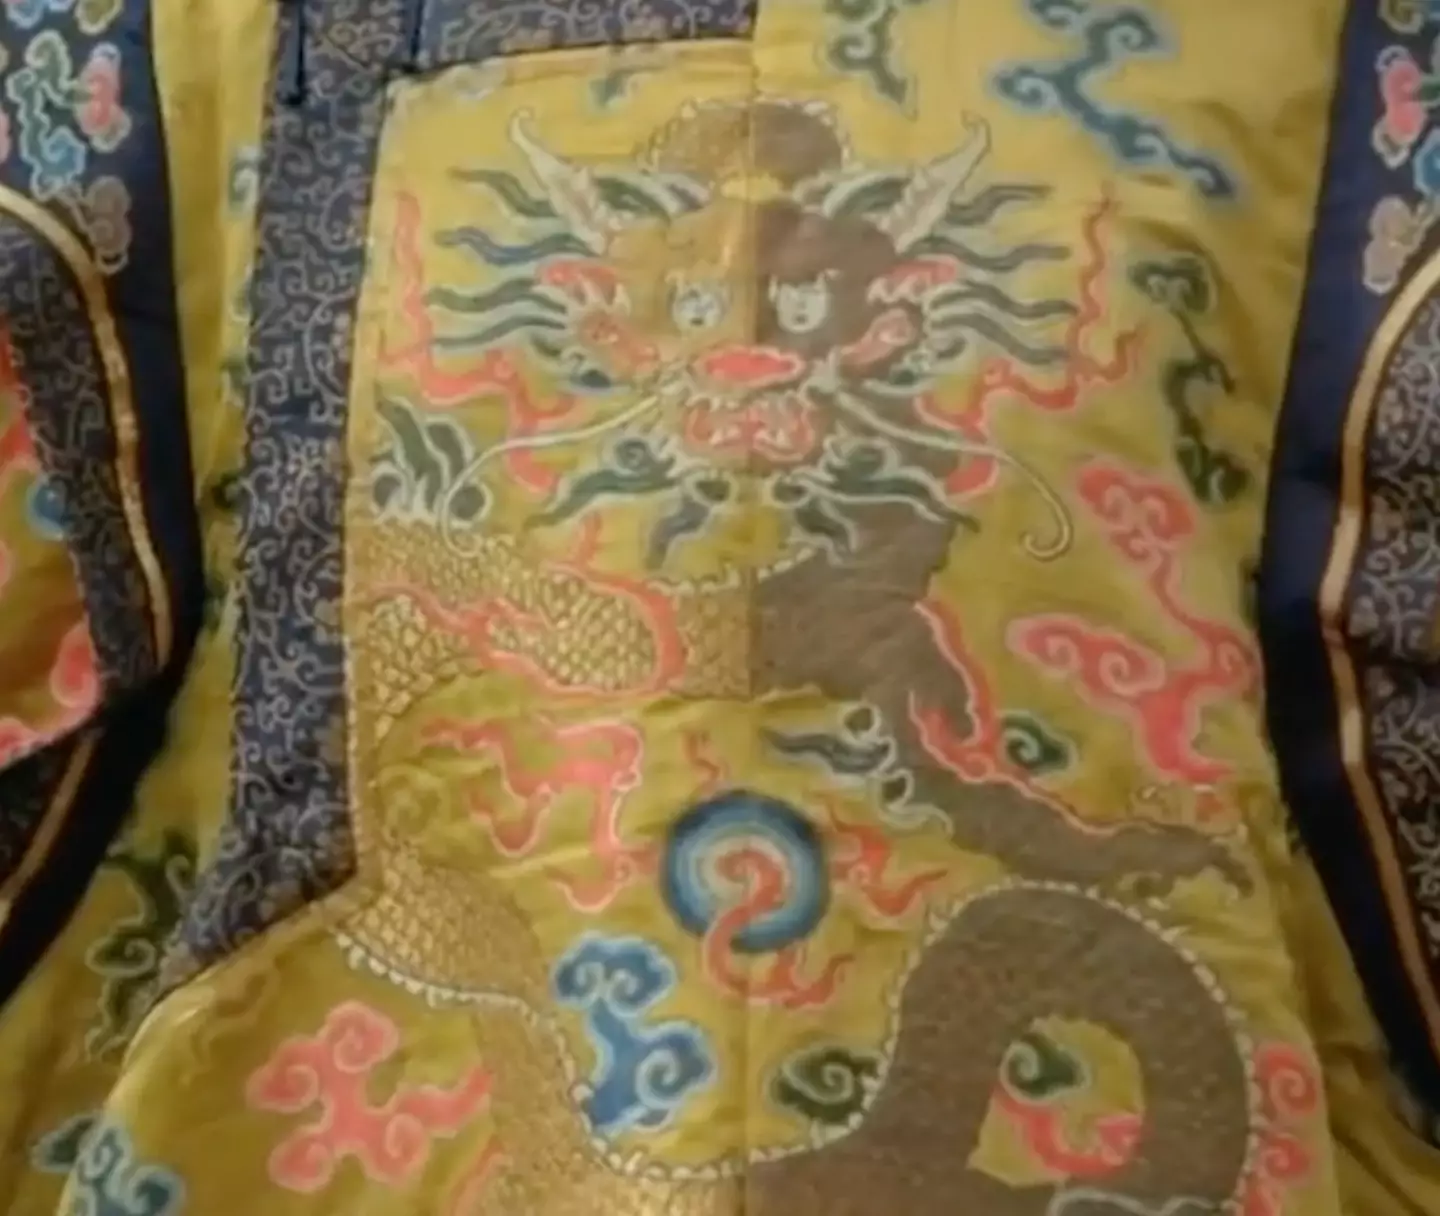 The detailed robe featured a dragon on the front.